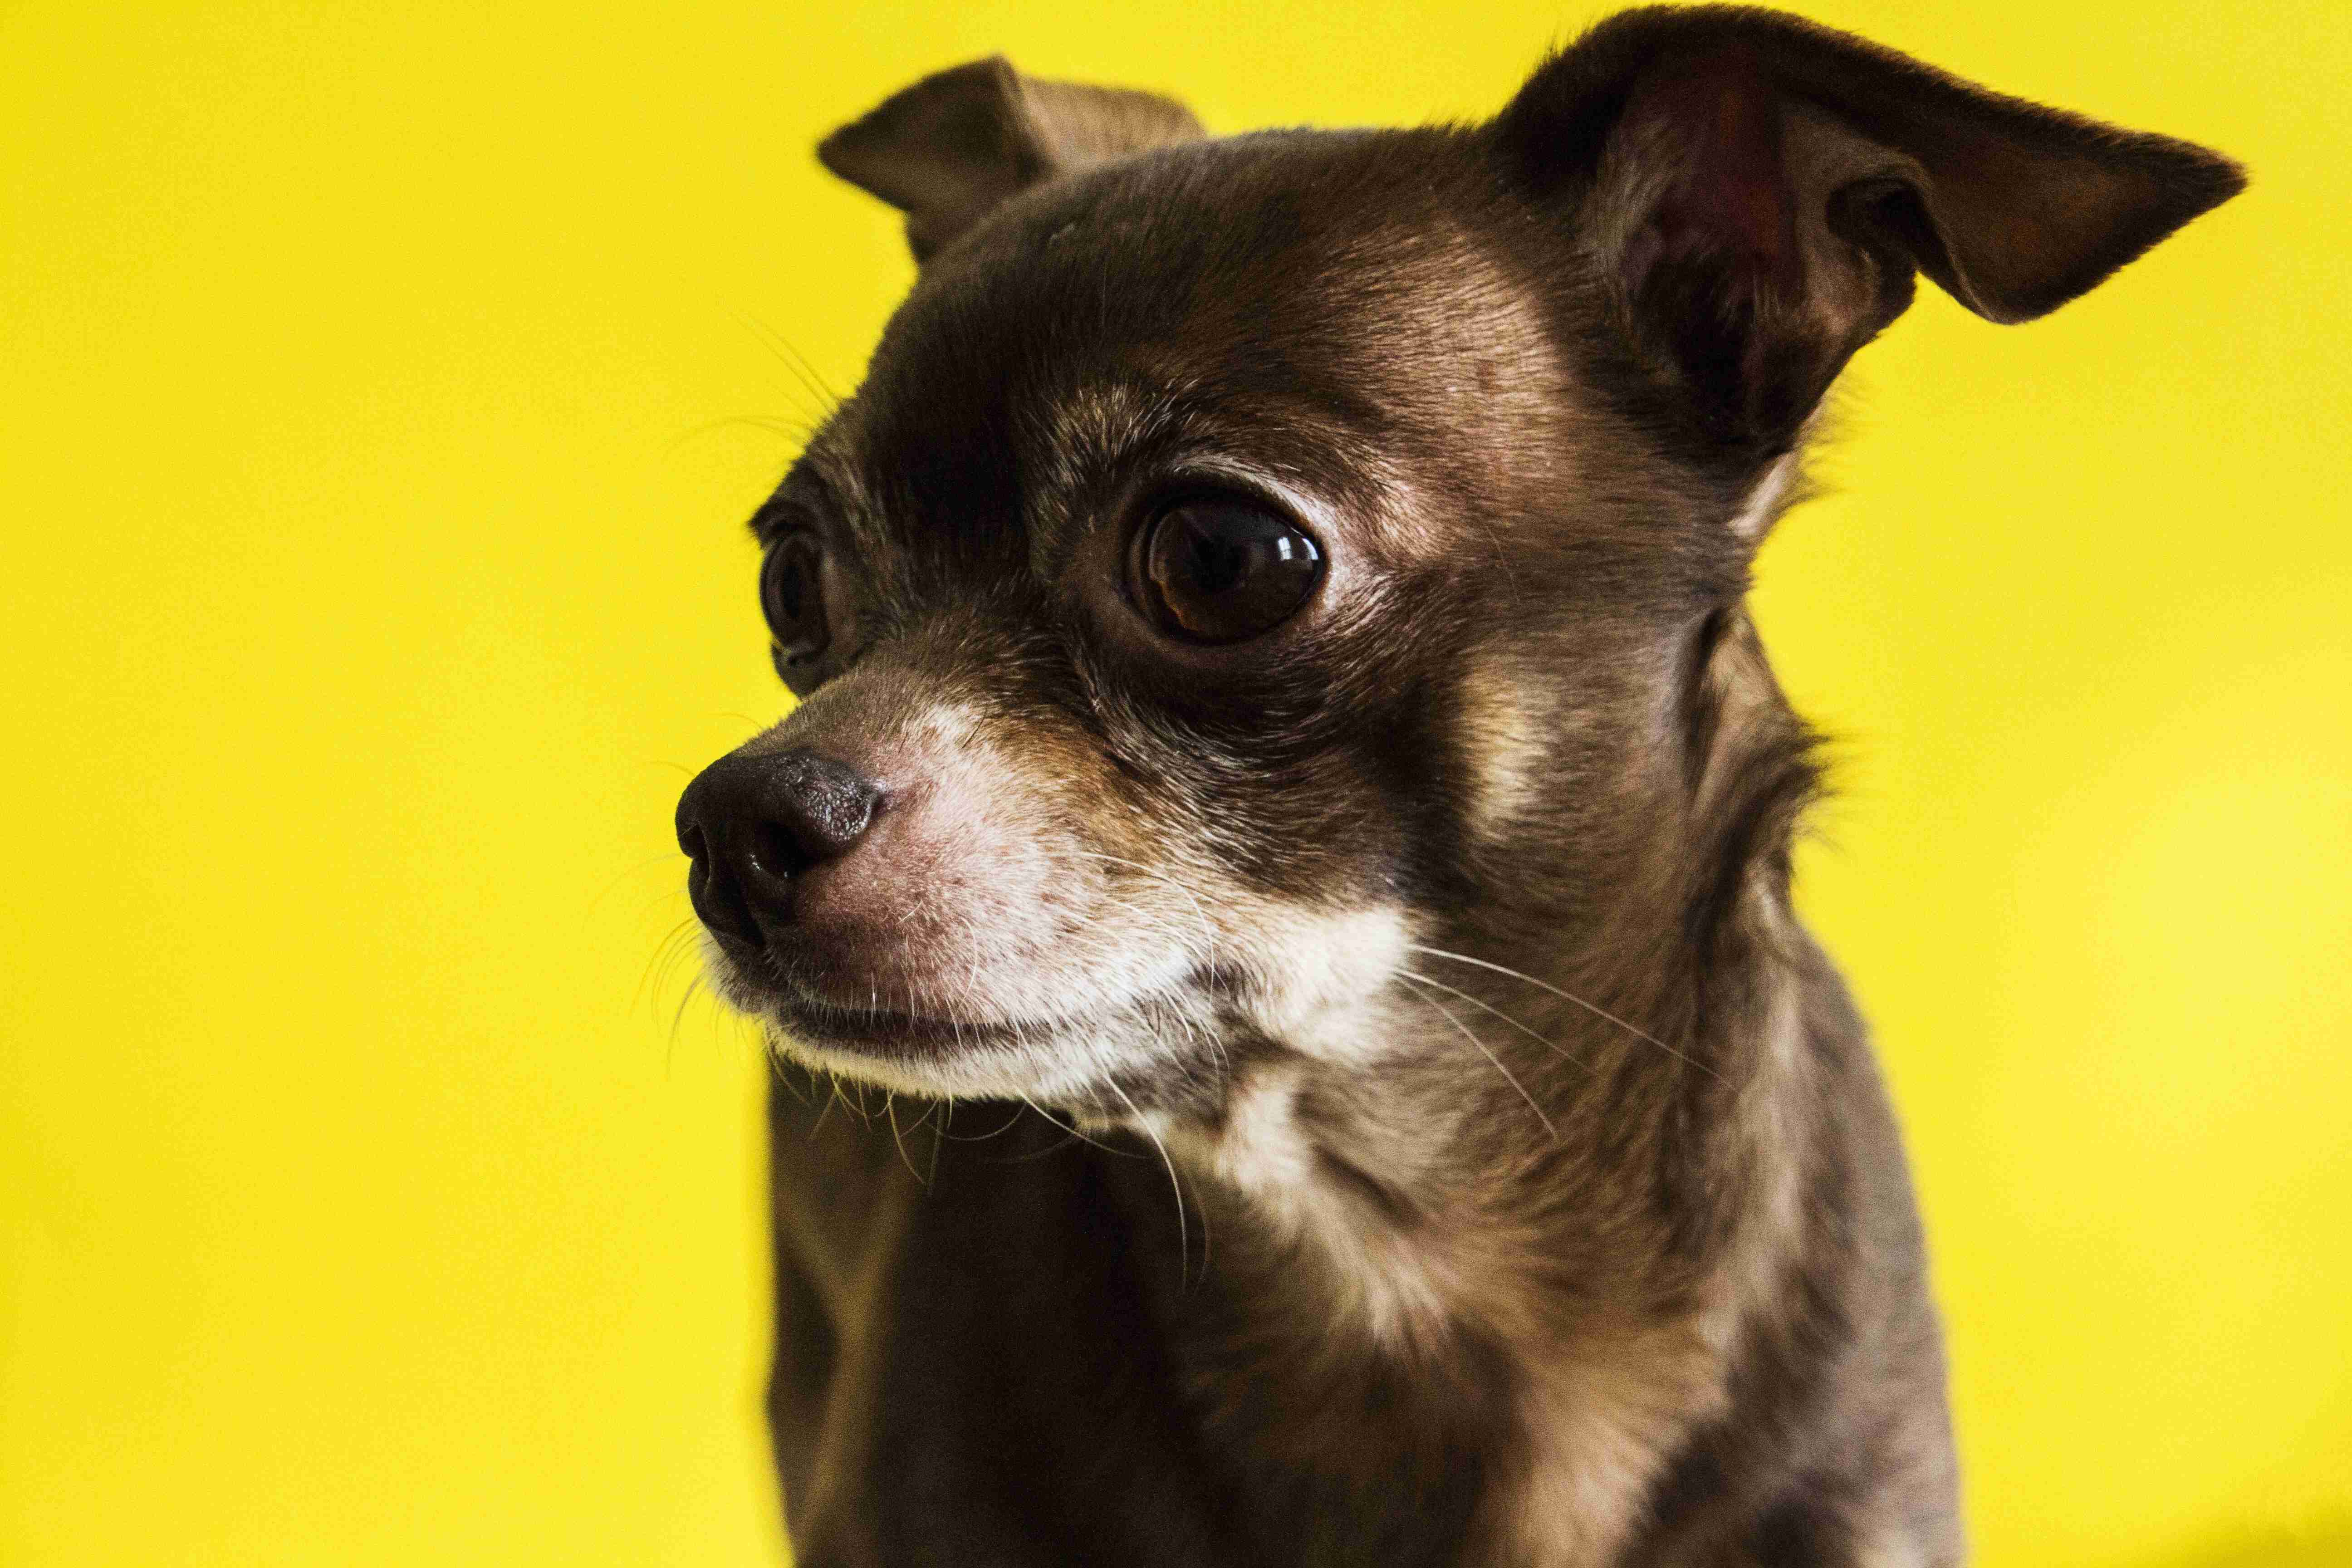 Are there any specific body language cues that can indicate a Chihuahua's anger is escalating?